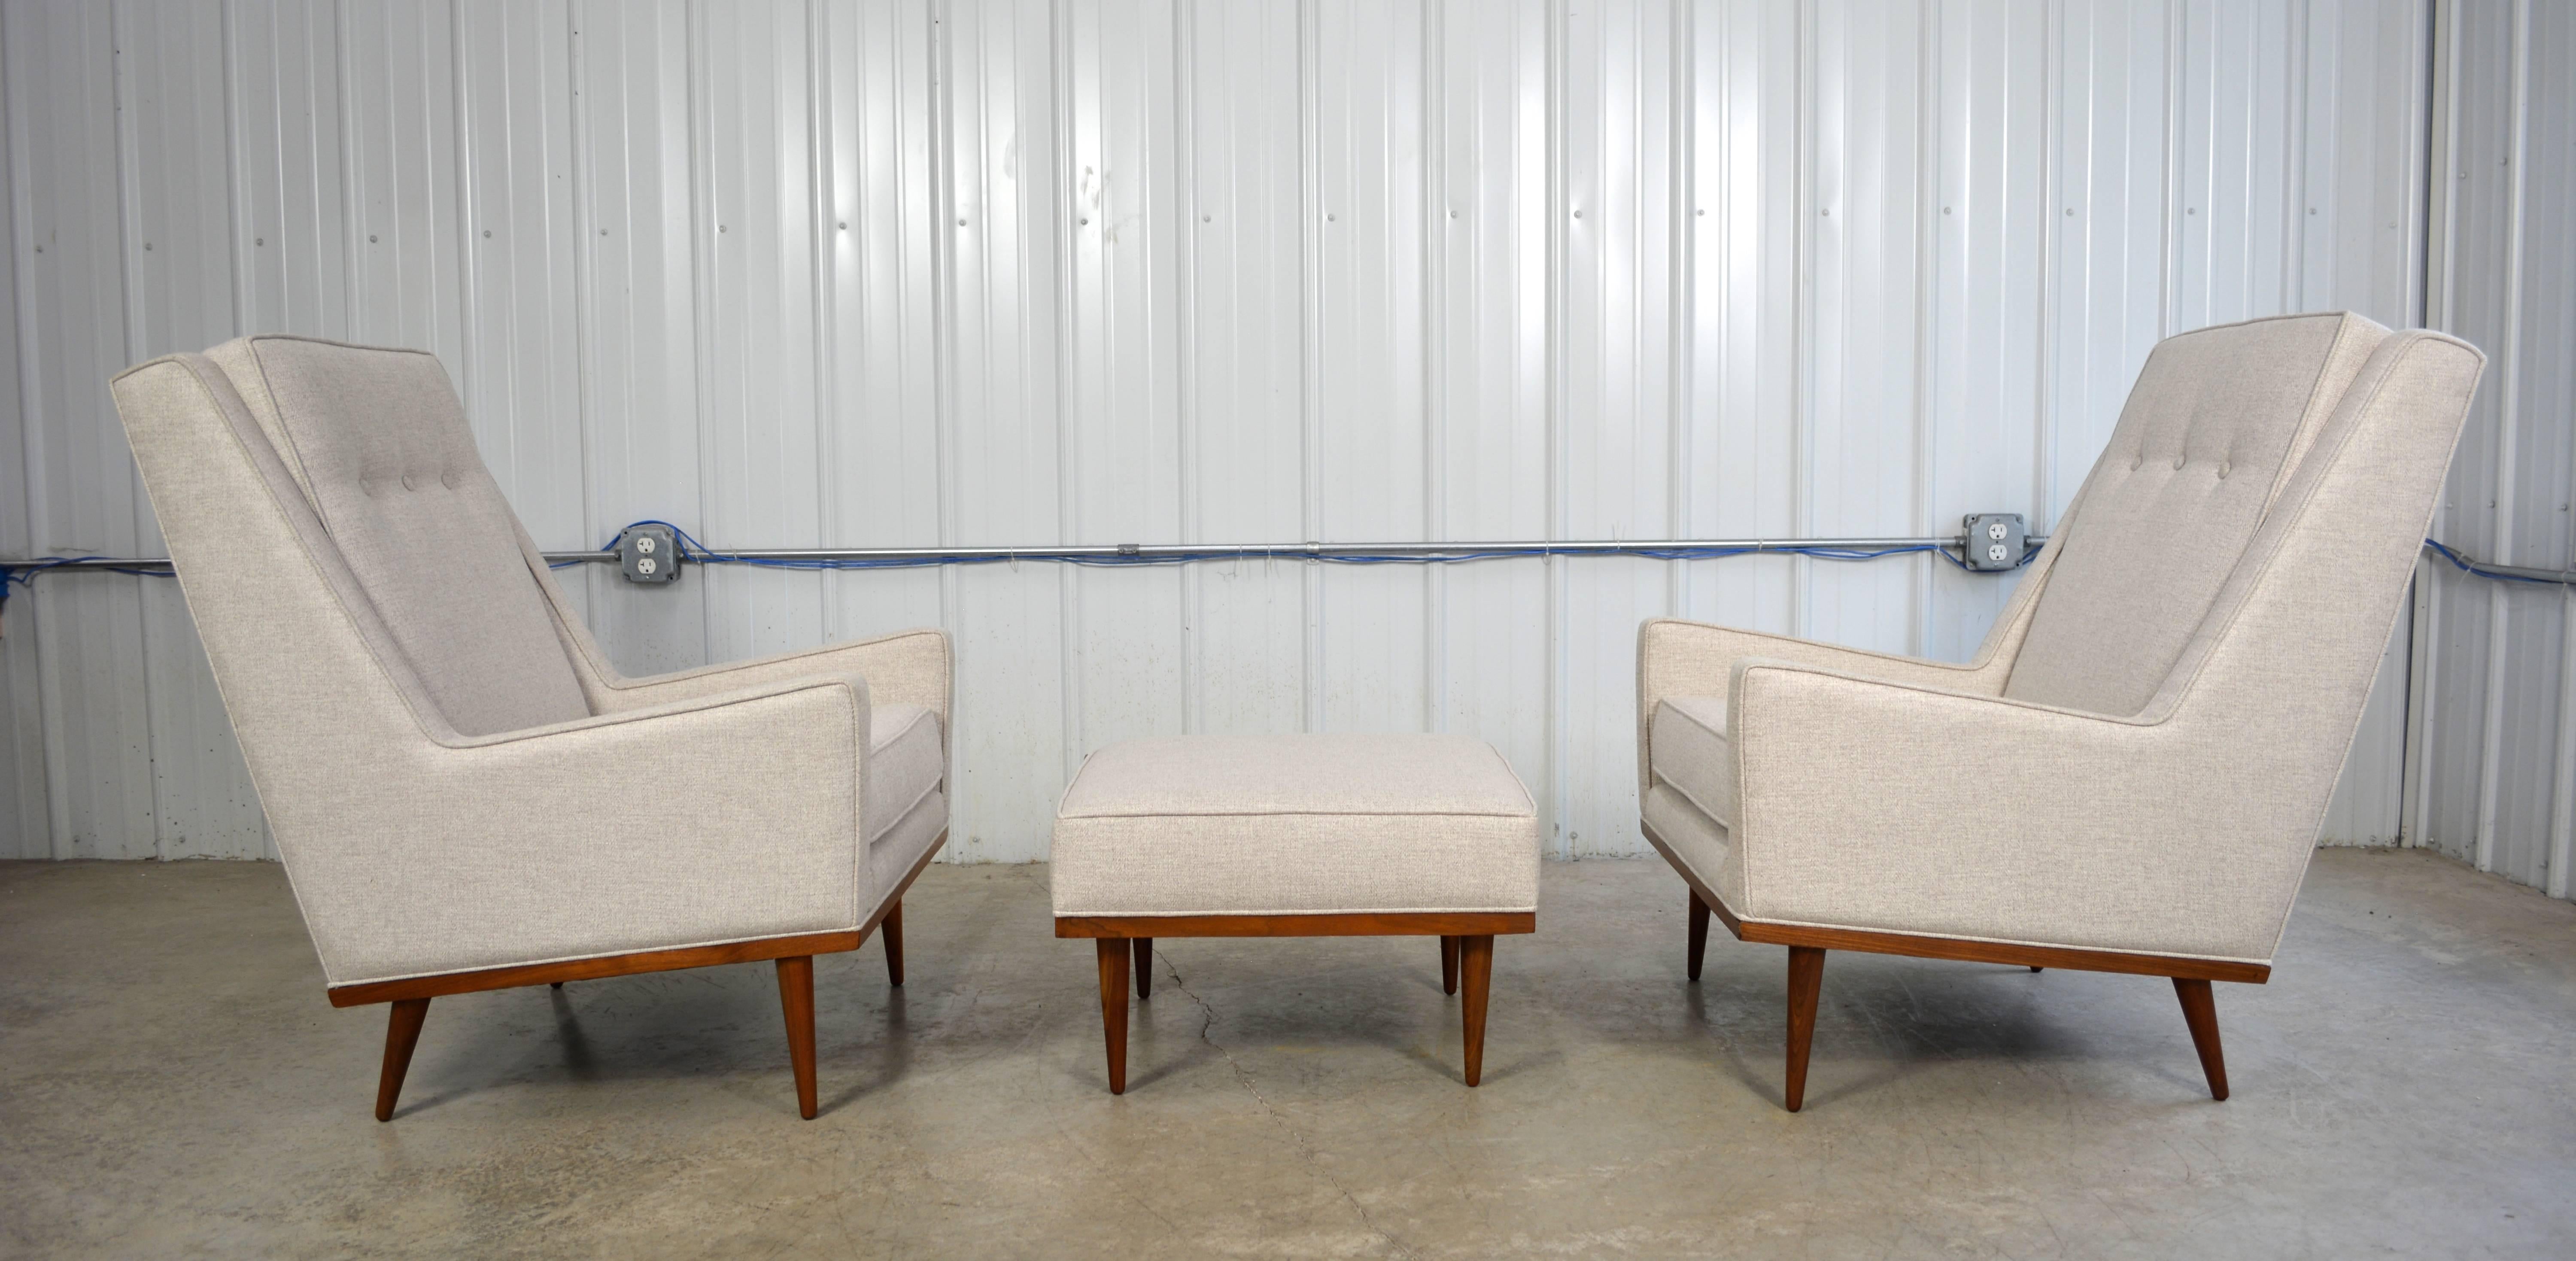 A pair of early lounge chairs and ottoman designed by Milo Baughman for James Inc. This set has been completely restored. Walnut legs and trim along the bottom edge of each piece.